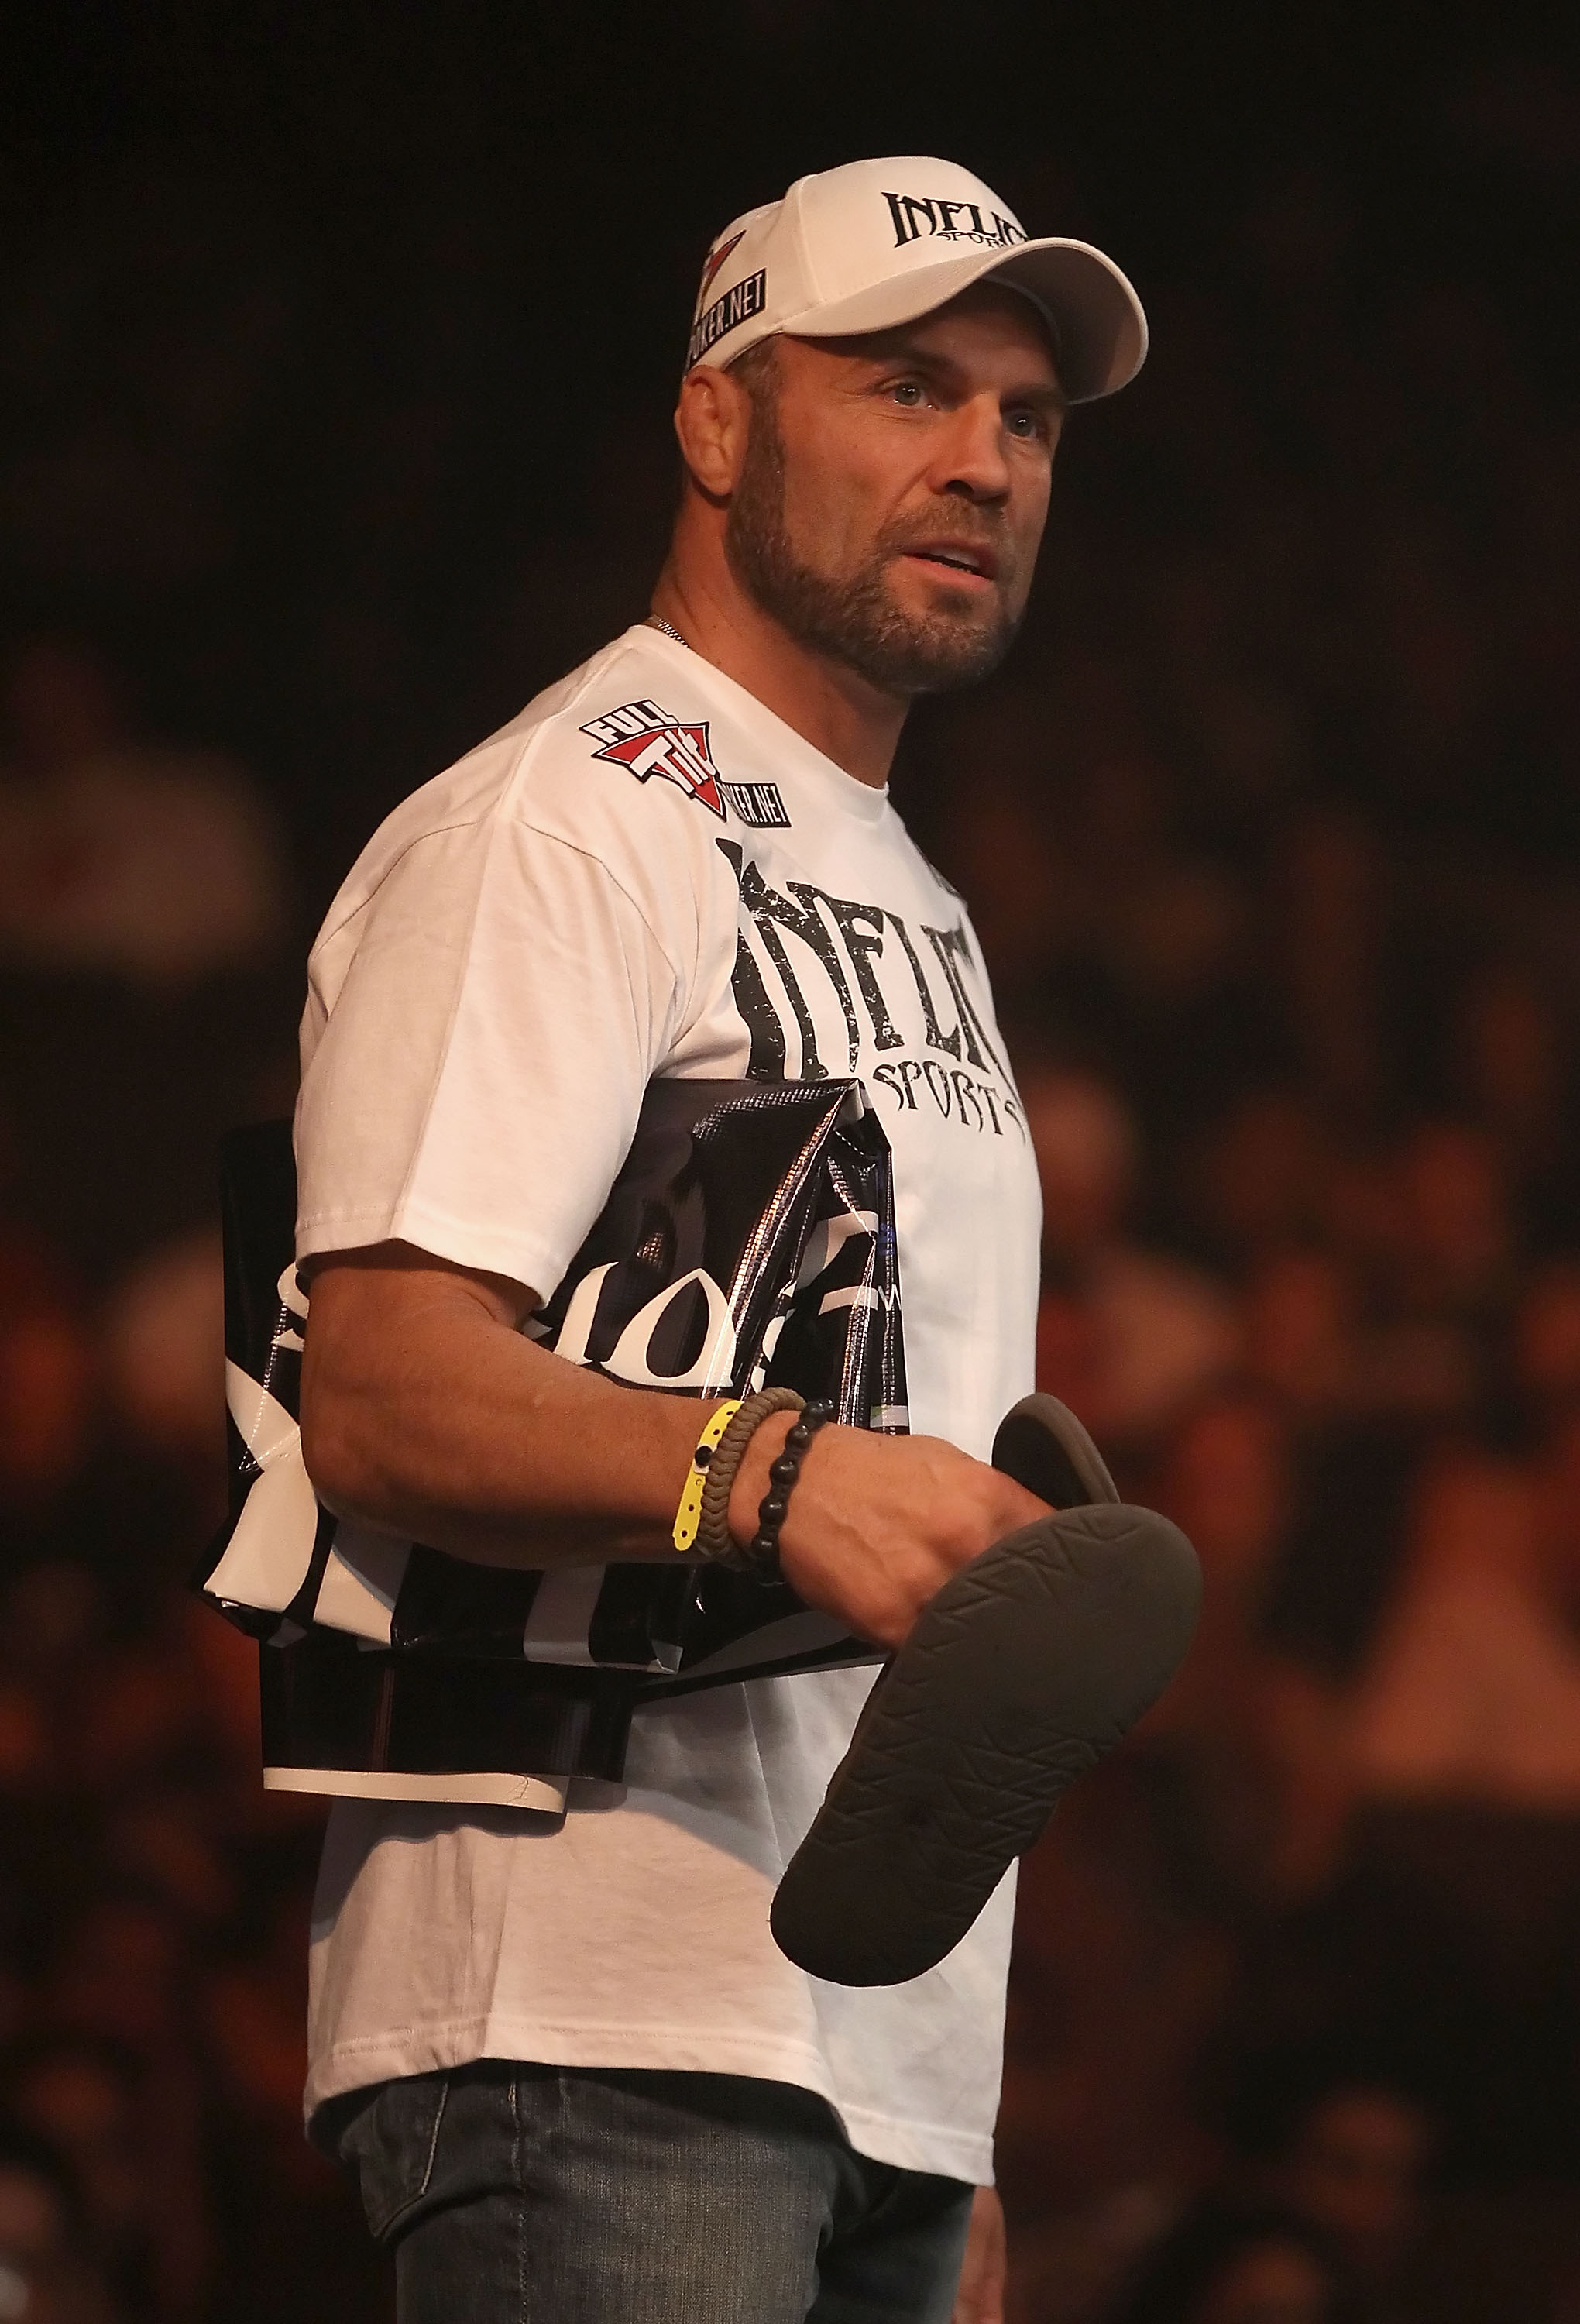 PHOENIX - AUGUST 13:  Randy Couture watches the Strikeforce Challengers Main Card bout at Dodge Theater on August 13, 2010 in Phoenix, Arizona.  (Photo by Christian Petersen/Getty Images)